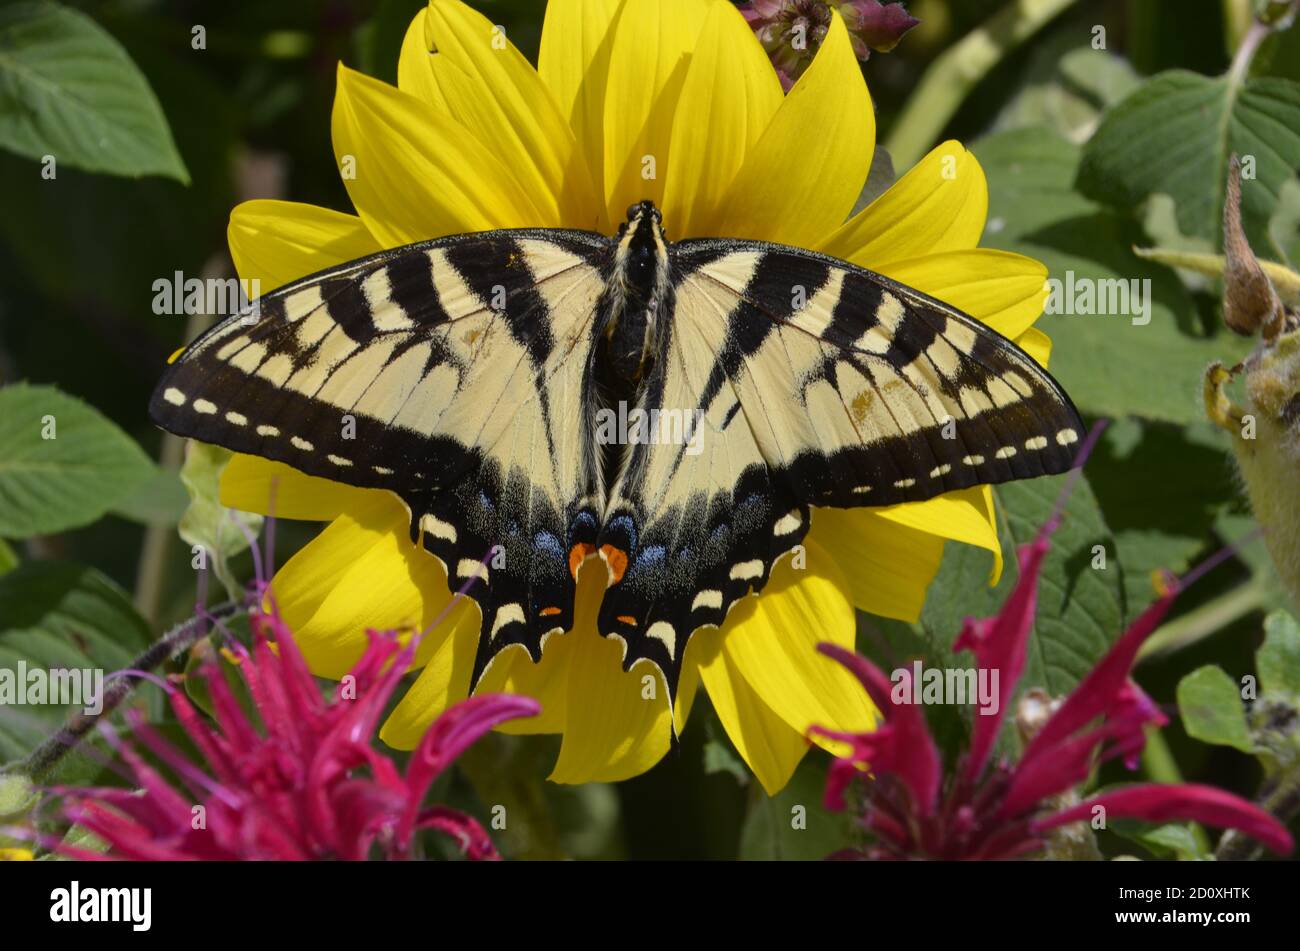 Swallowtail butterfly on sunflower with bee balm, summer, Maine, USA Stock Photo